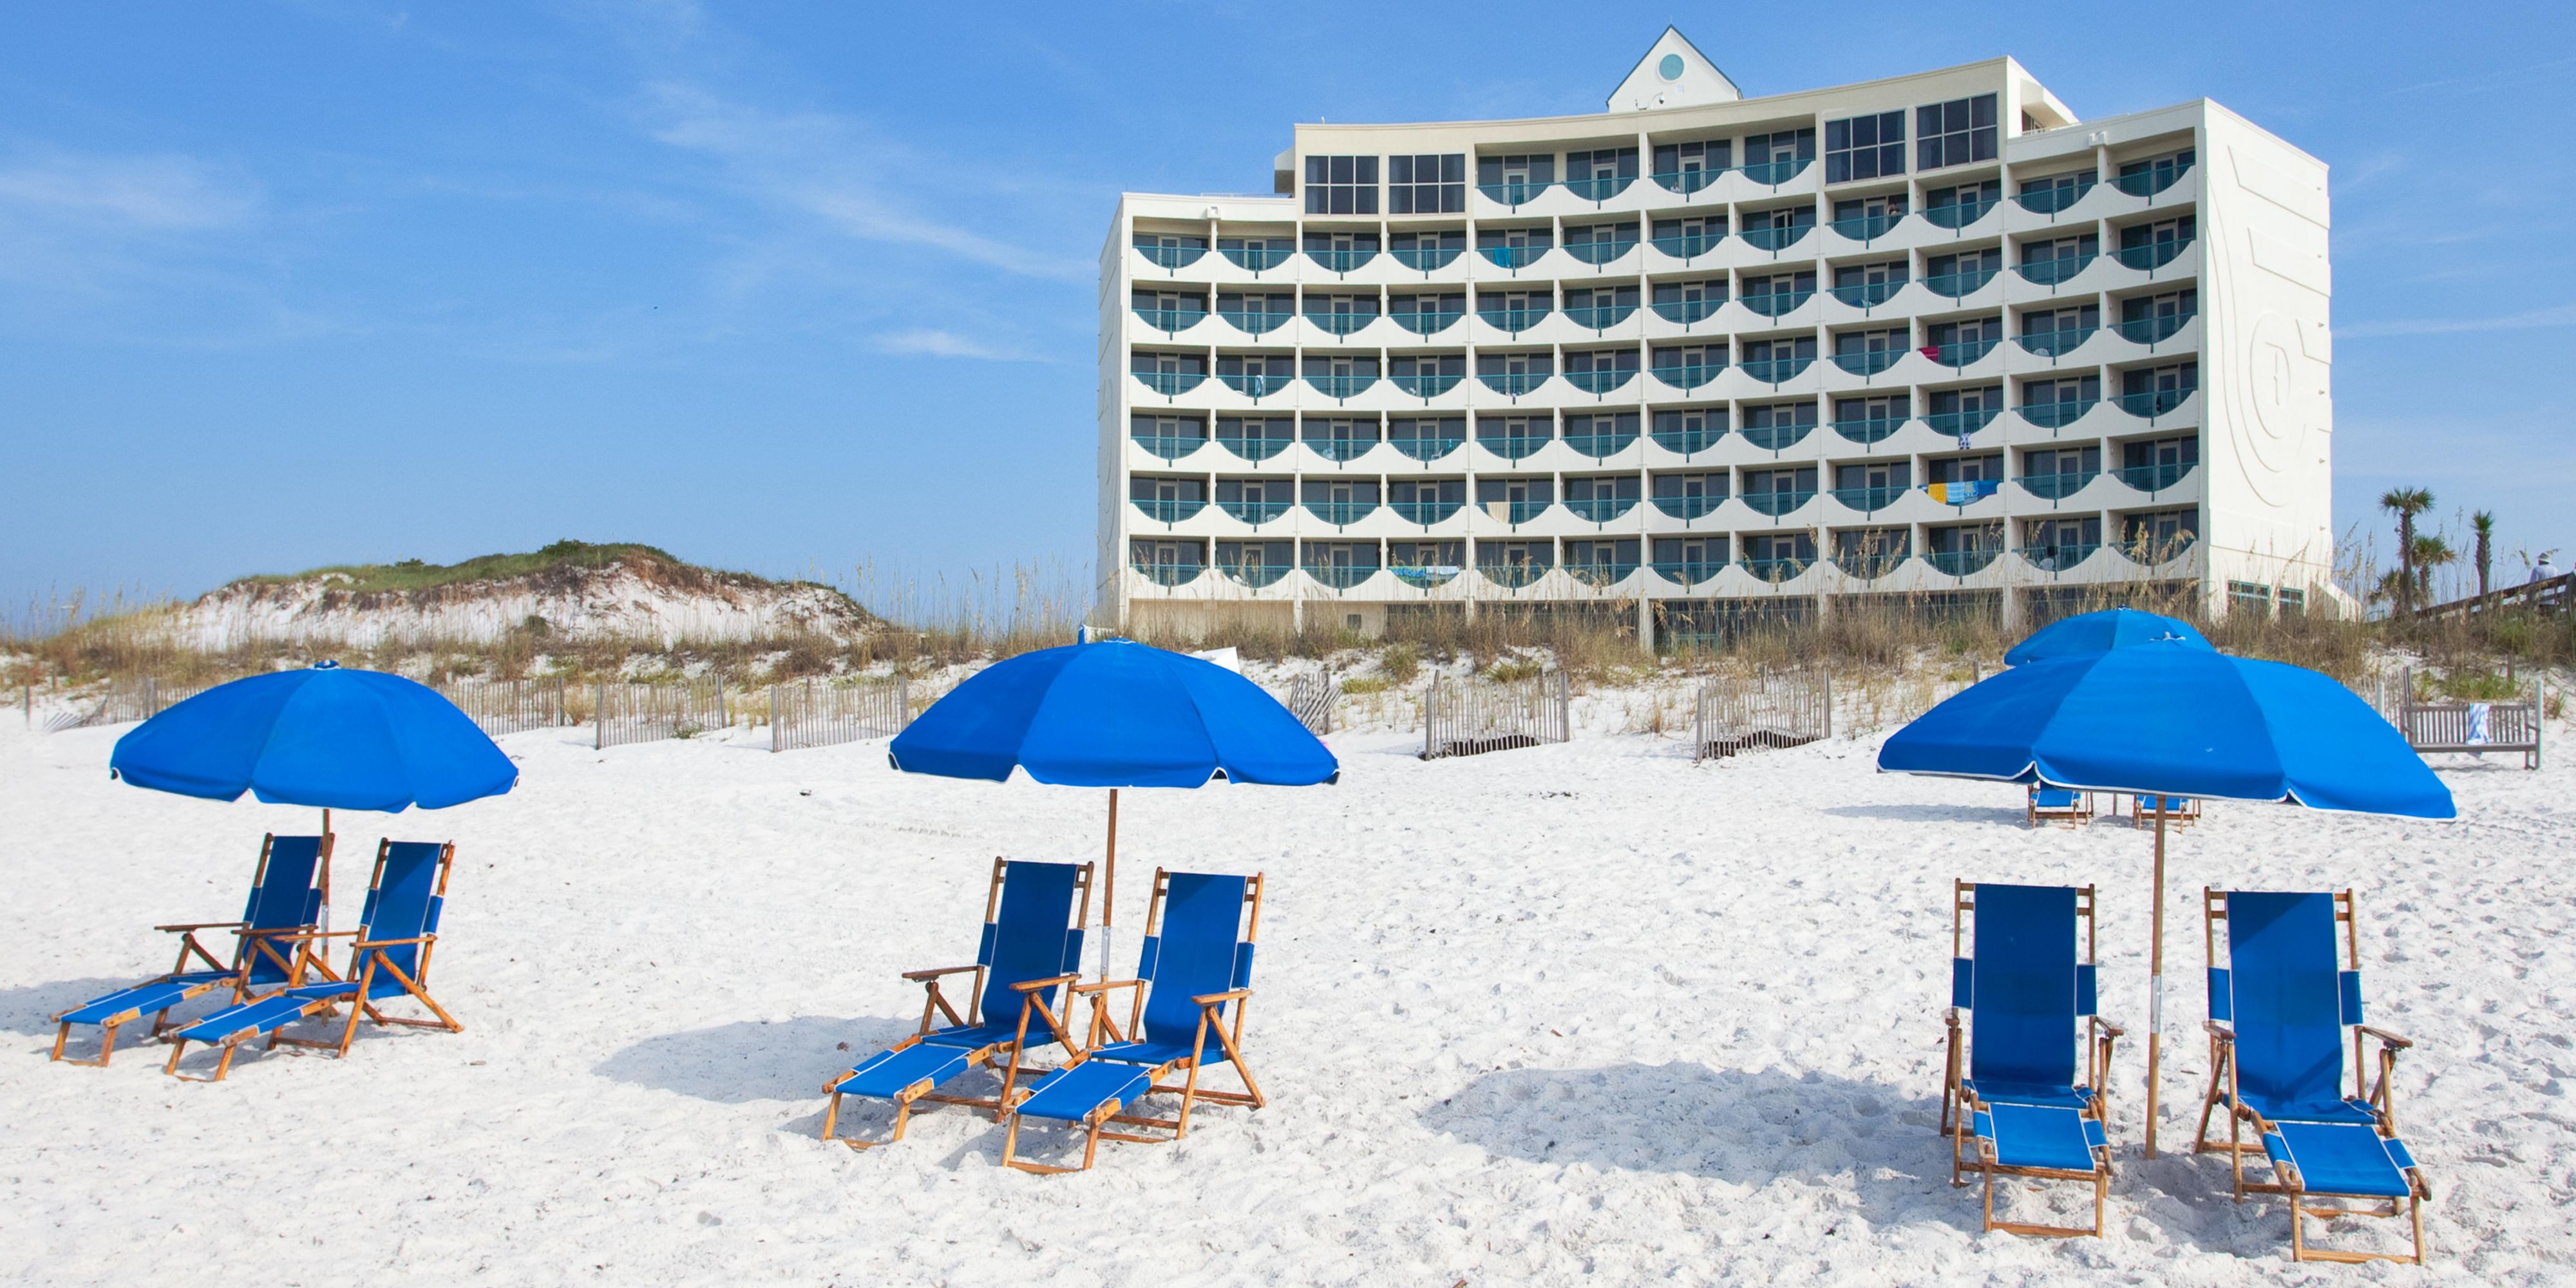 10 Best Beaches In Pensacola, Florida You Must Visit 2022